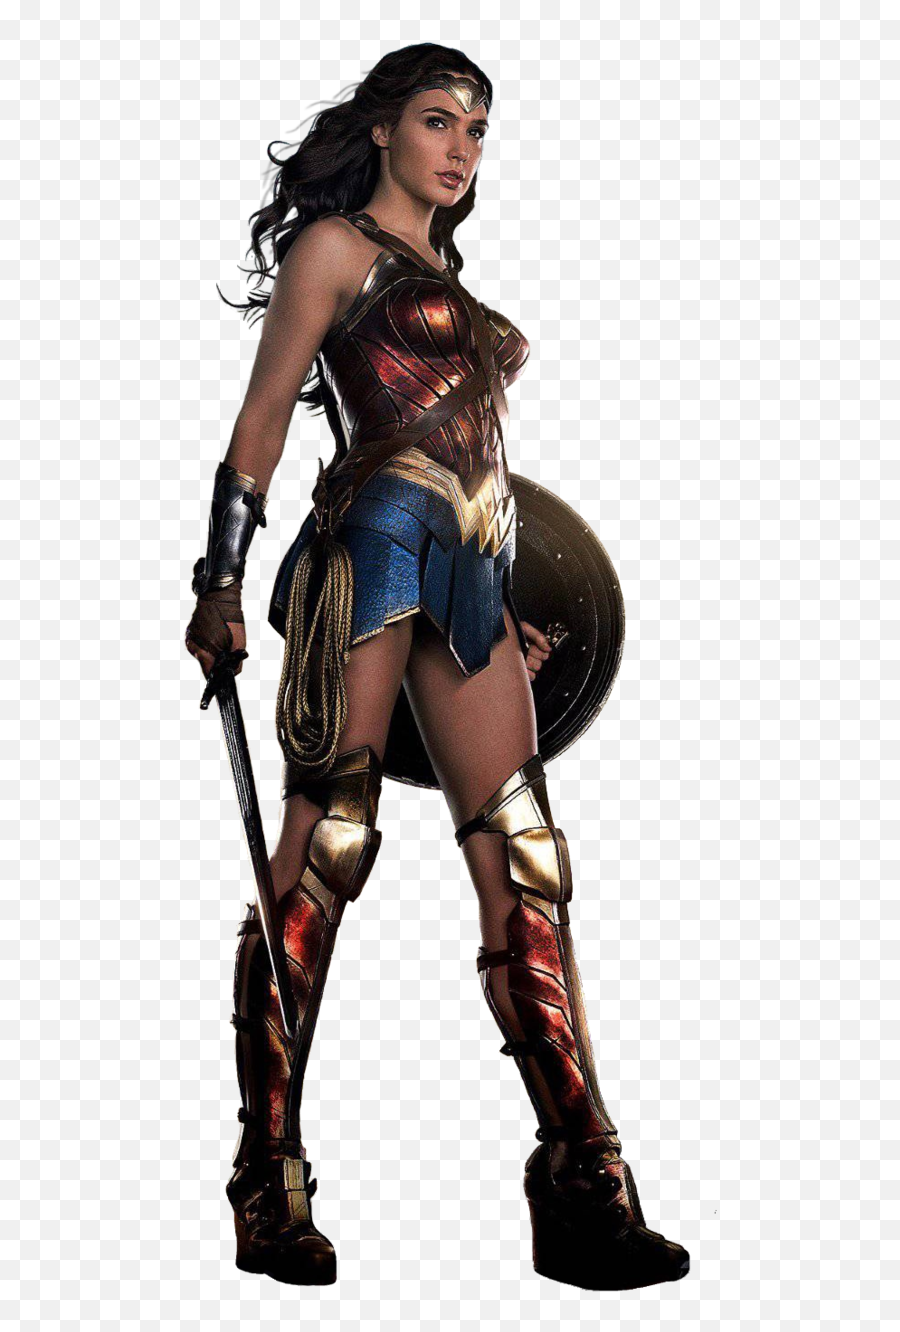 Png4all - Free Wonder Woman Image For Download Wonder Woman No Background Png,Wonder Woman Logo Transparent Background